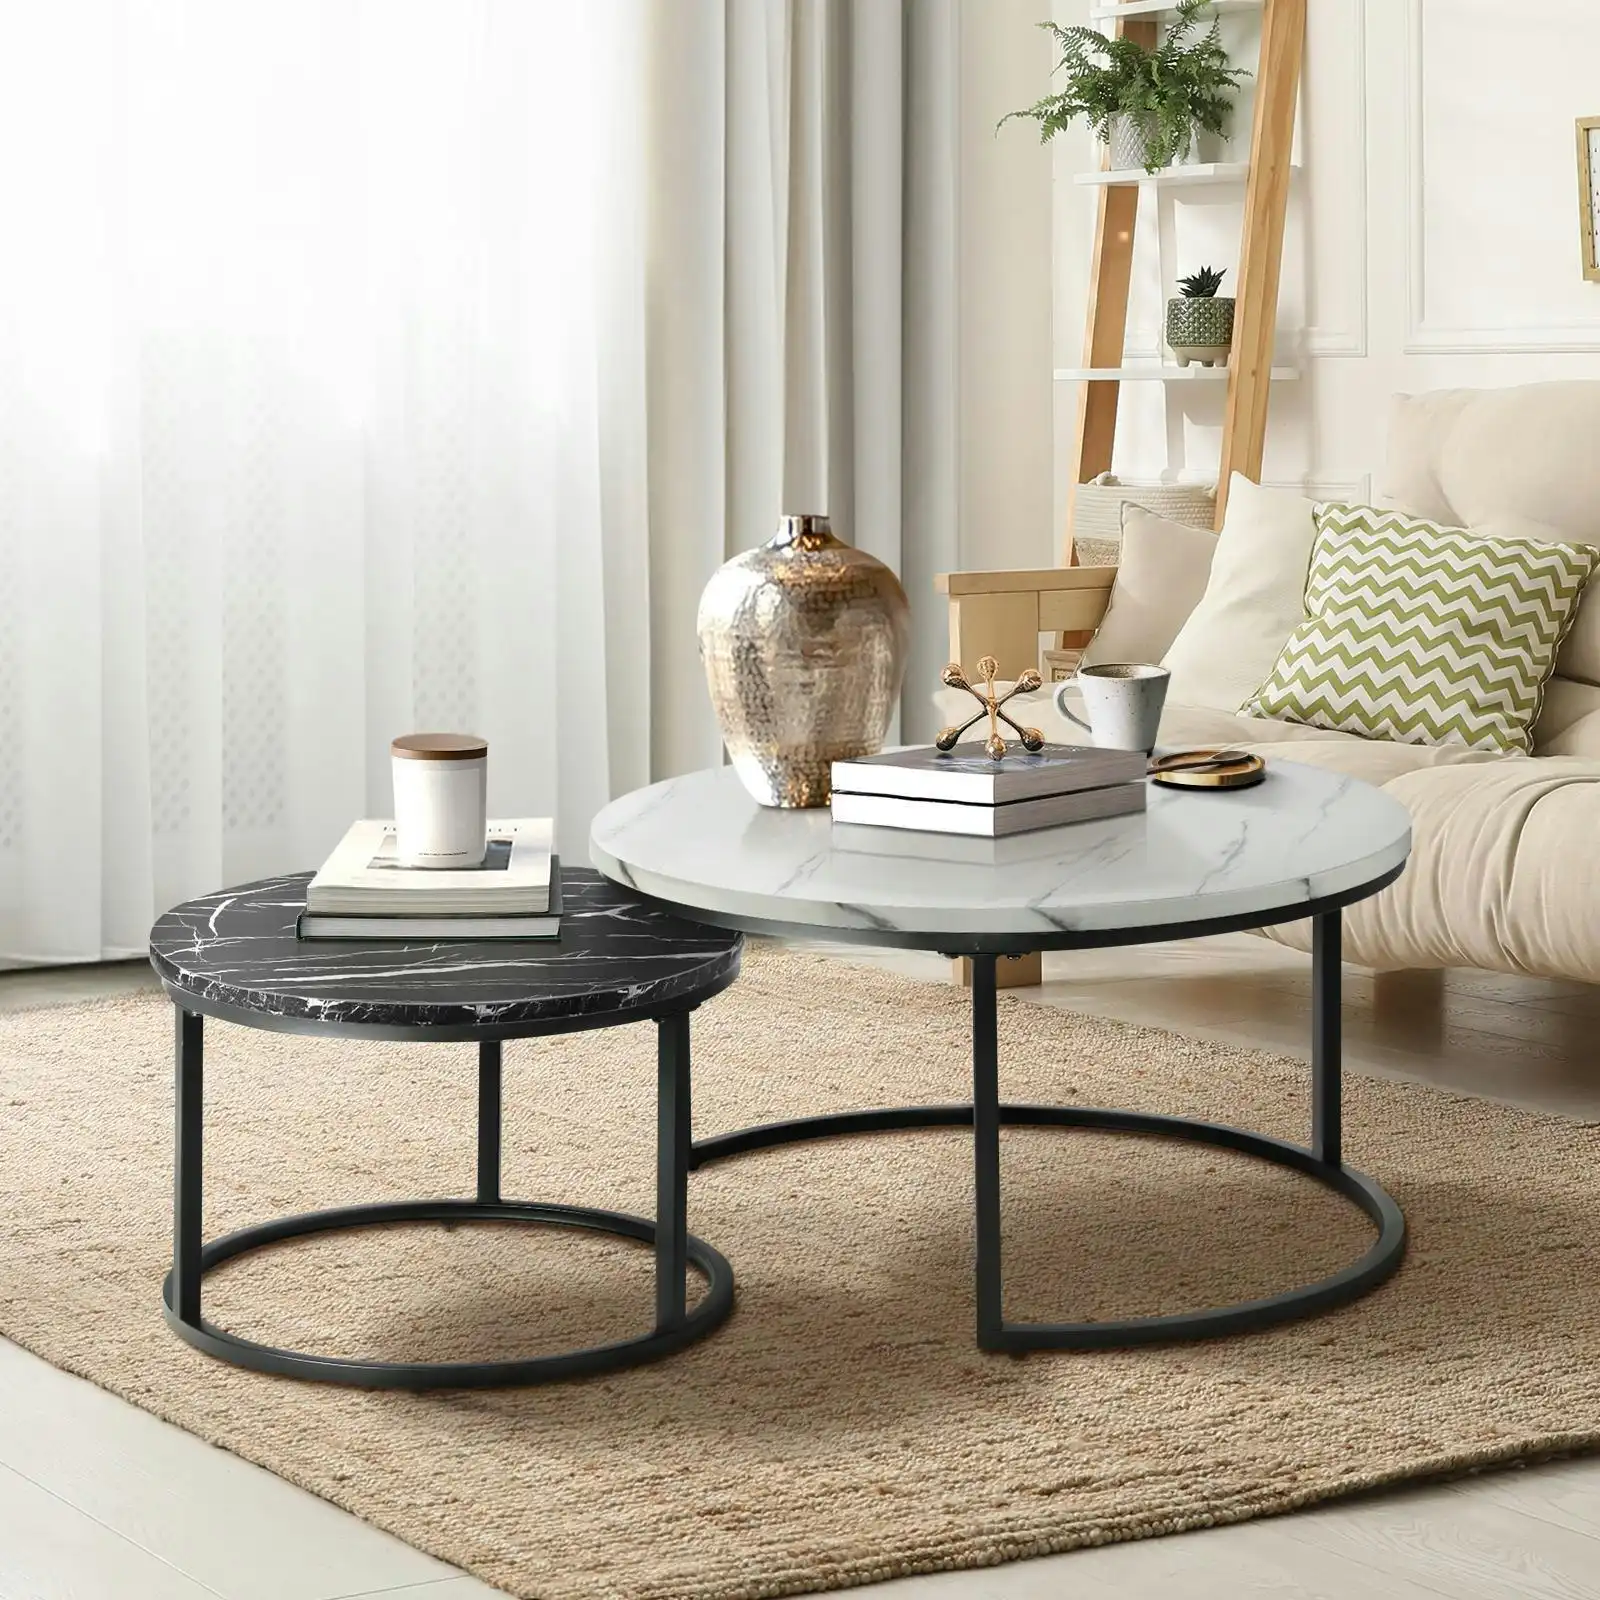 Oikiture Set of 2 Coffee Table Round Nesting Side End Table White and Black